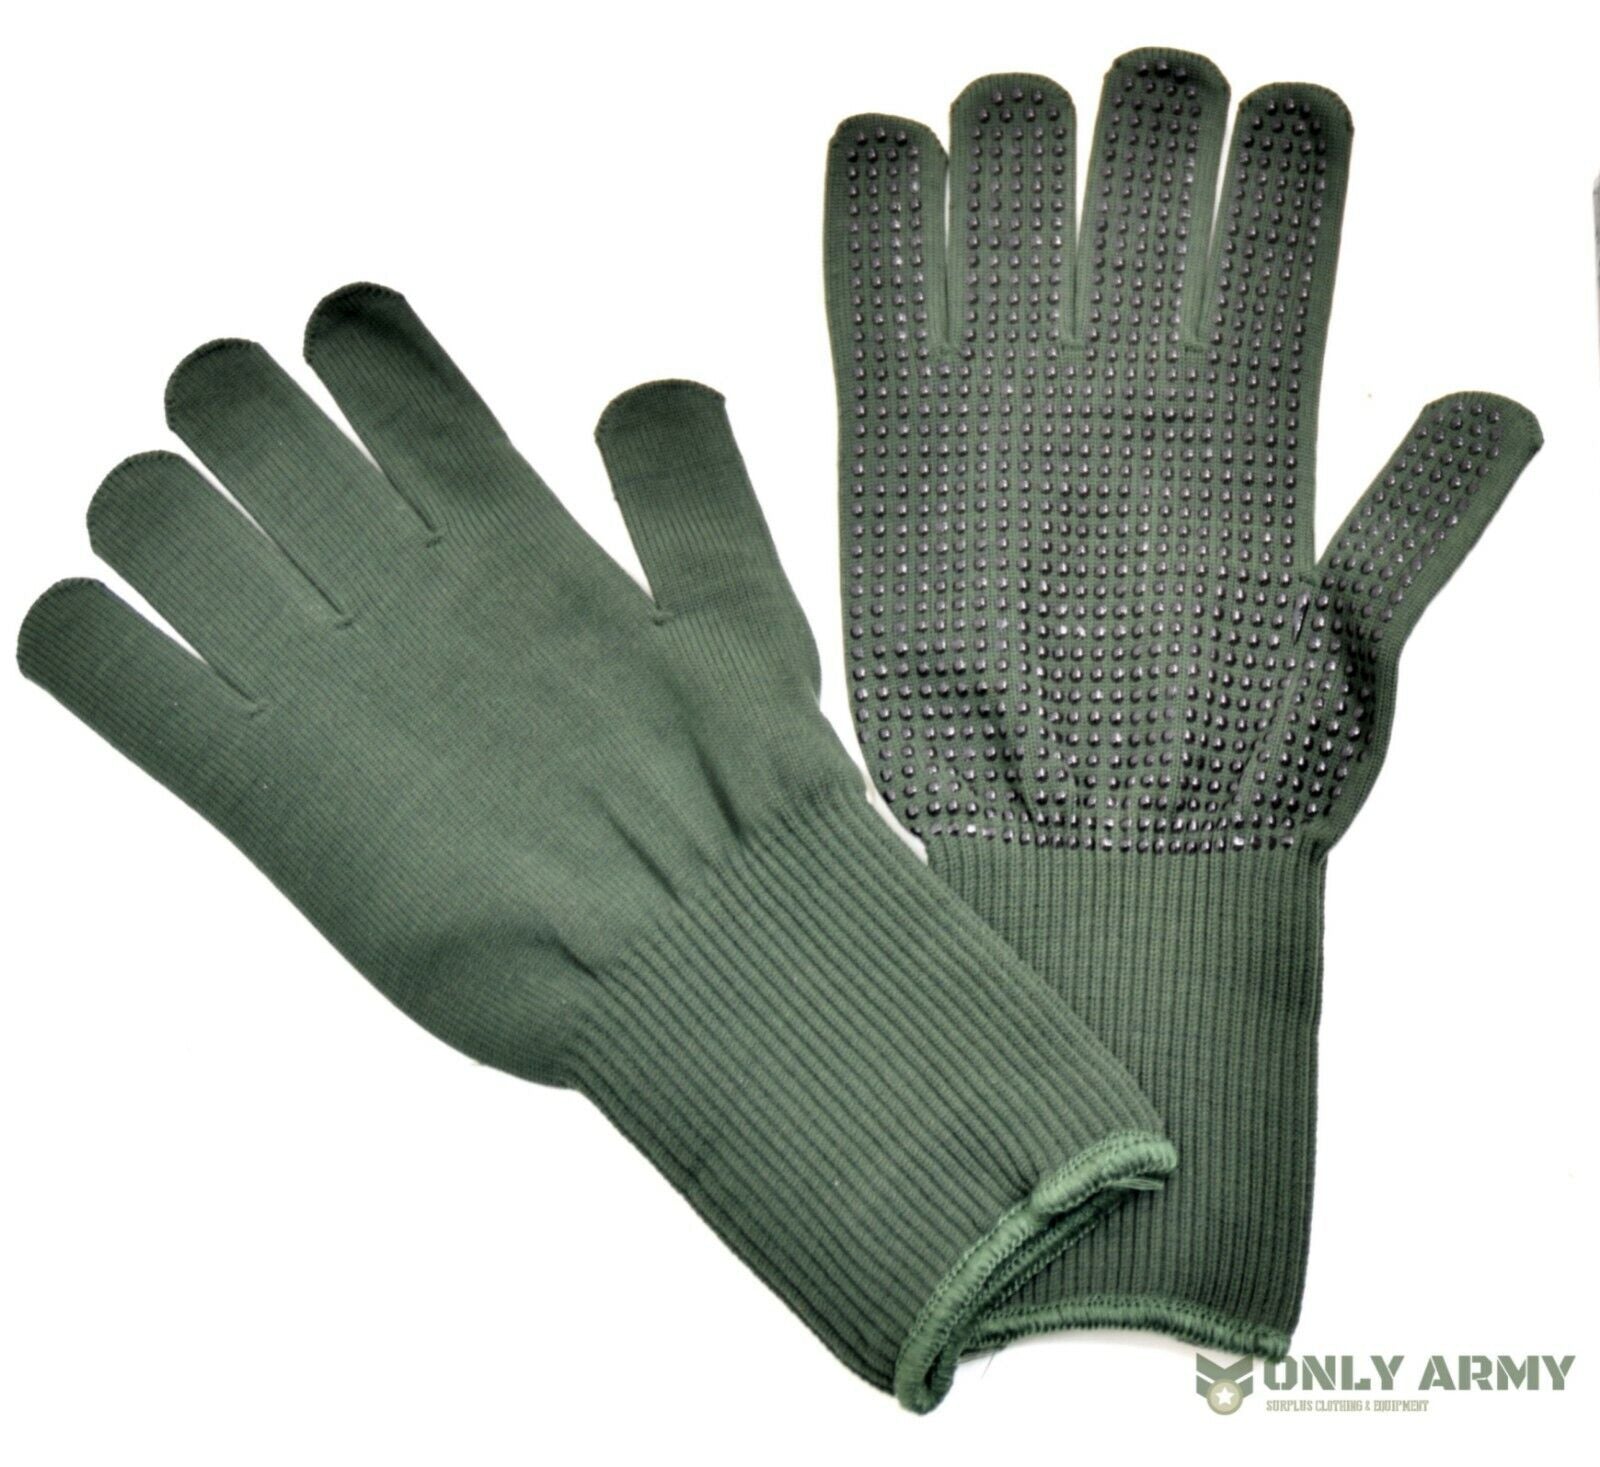 NEW - British Army Issue Grip Gloves Combat Contact Gripper Glove ARAMID Olive 